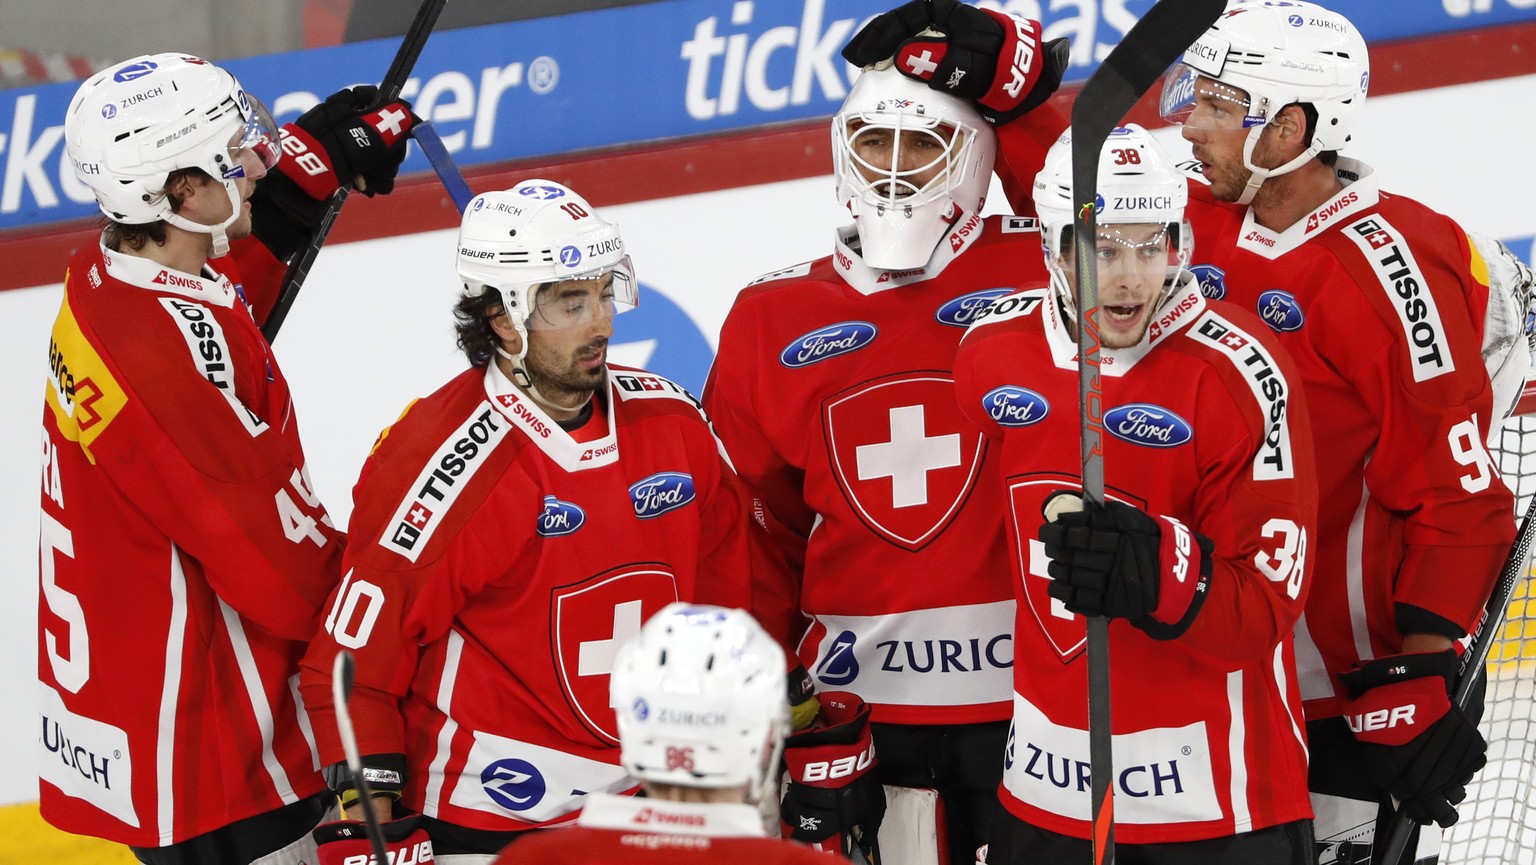 Switzerland&#039;s goalkeeper Joren van Pottleberghe, center, celebrates with his teammates Michael Fora, Andres Ambuehl, Lukas Frick and Samuel Walser, from left, at the end of a friendly ice hockey  ...